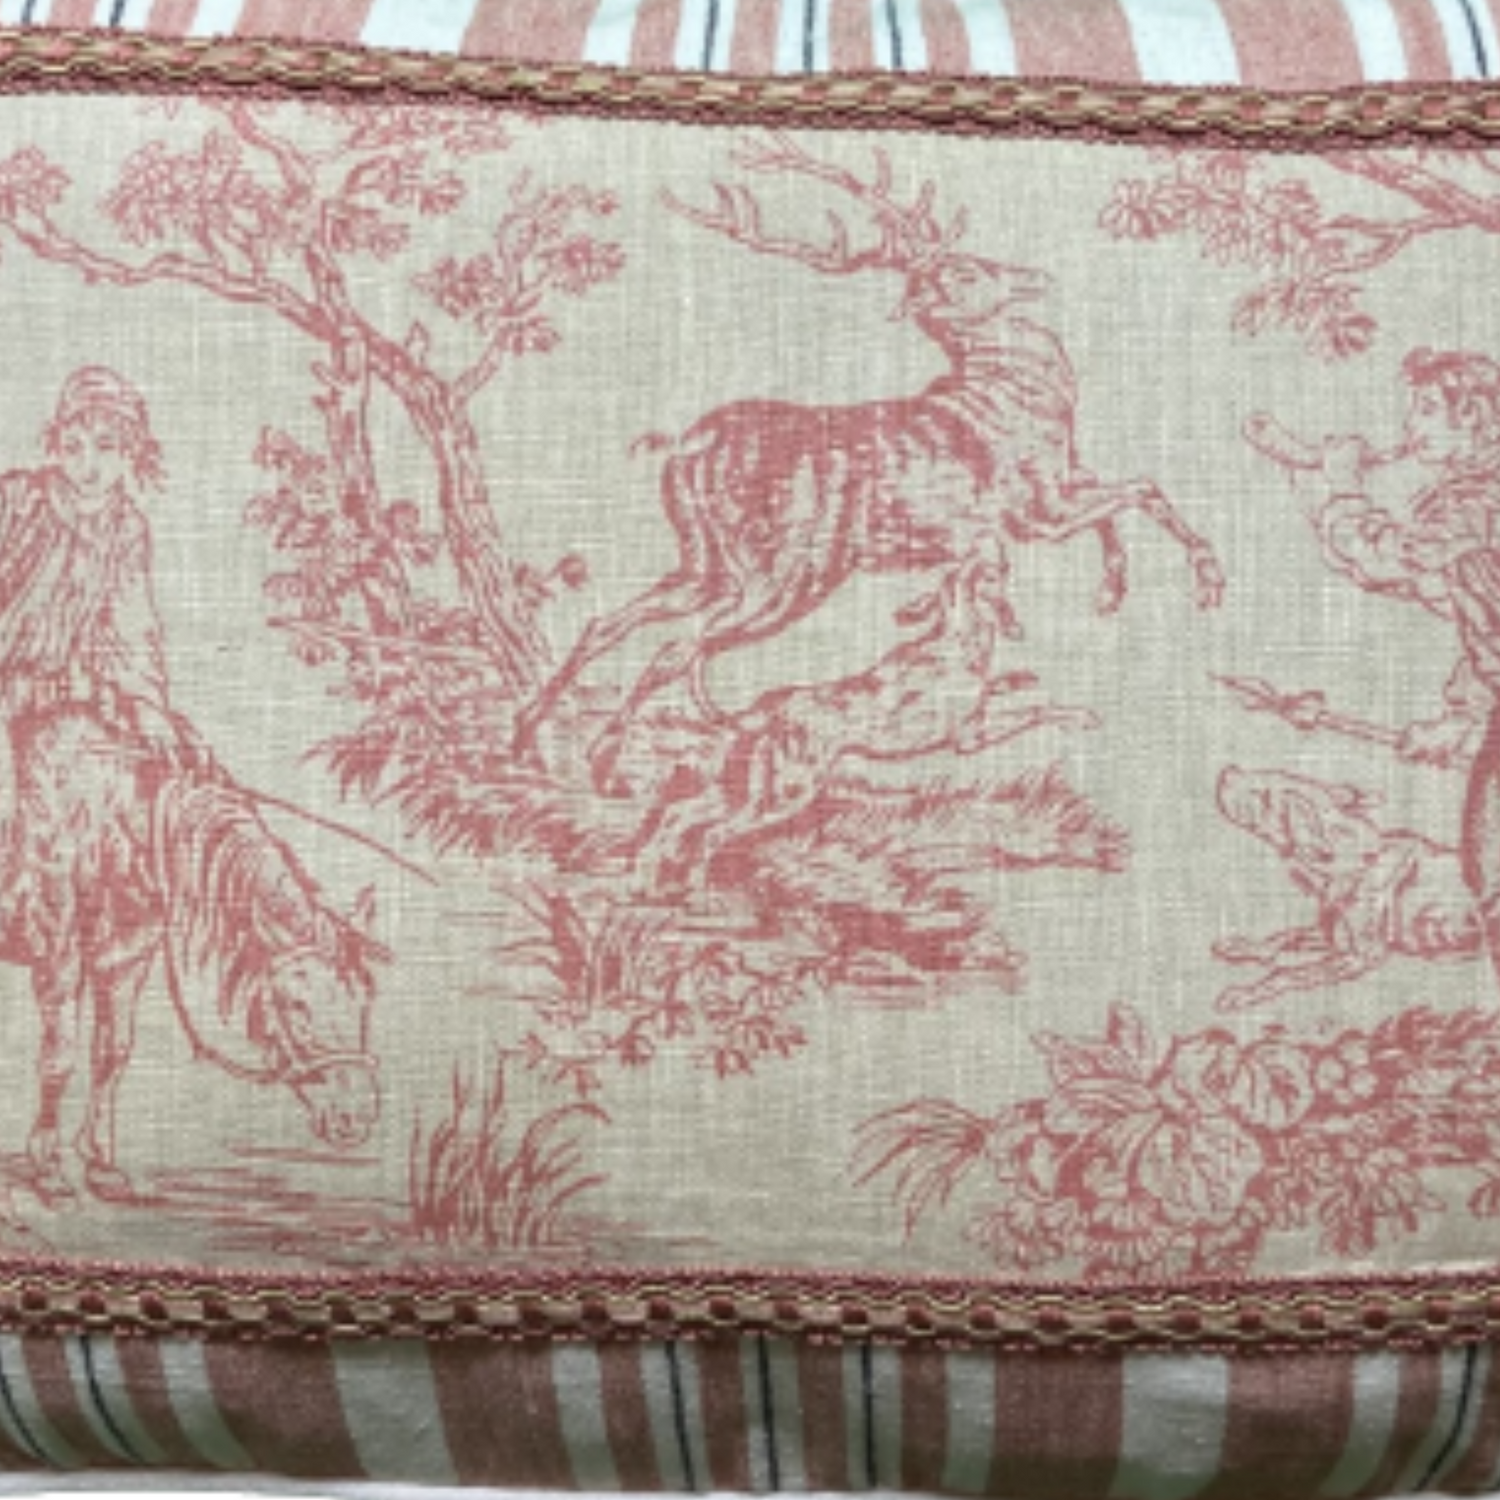 vintage framed toile decorative pillow 16 x 20 with down/feather insert main front side